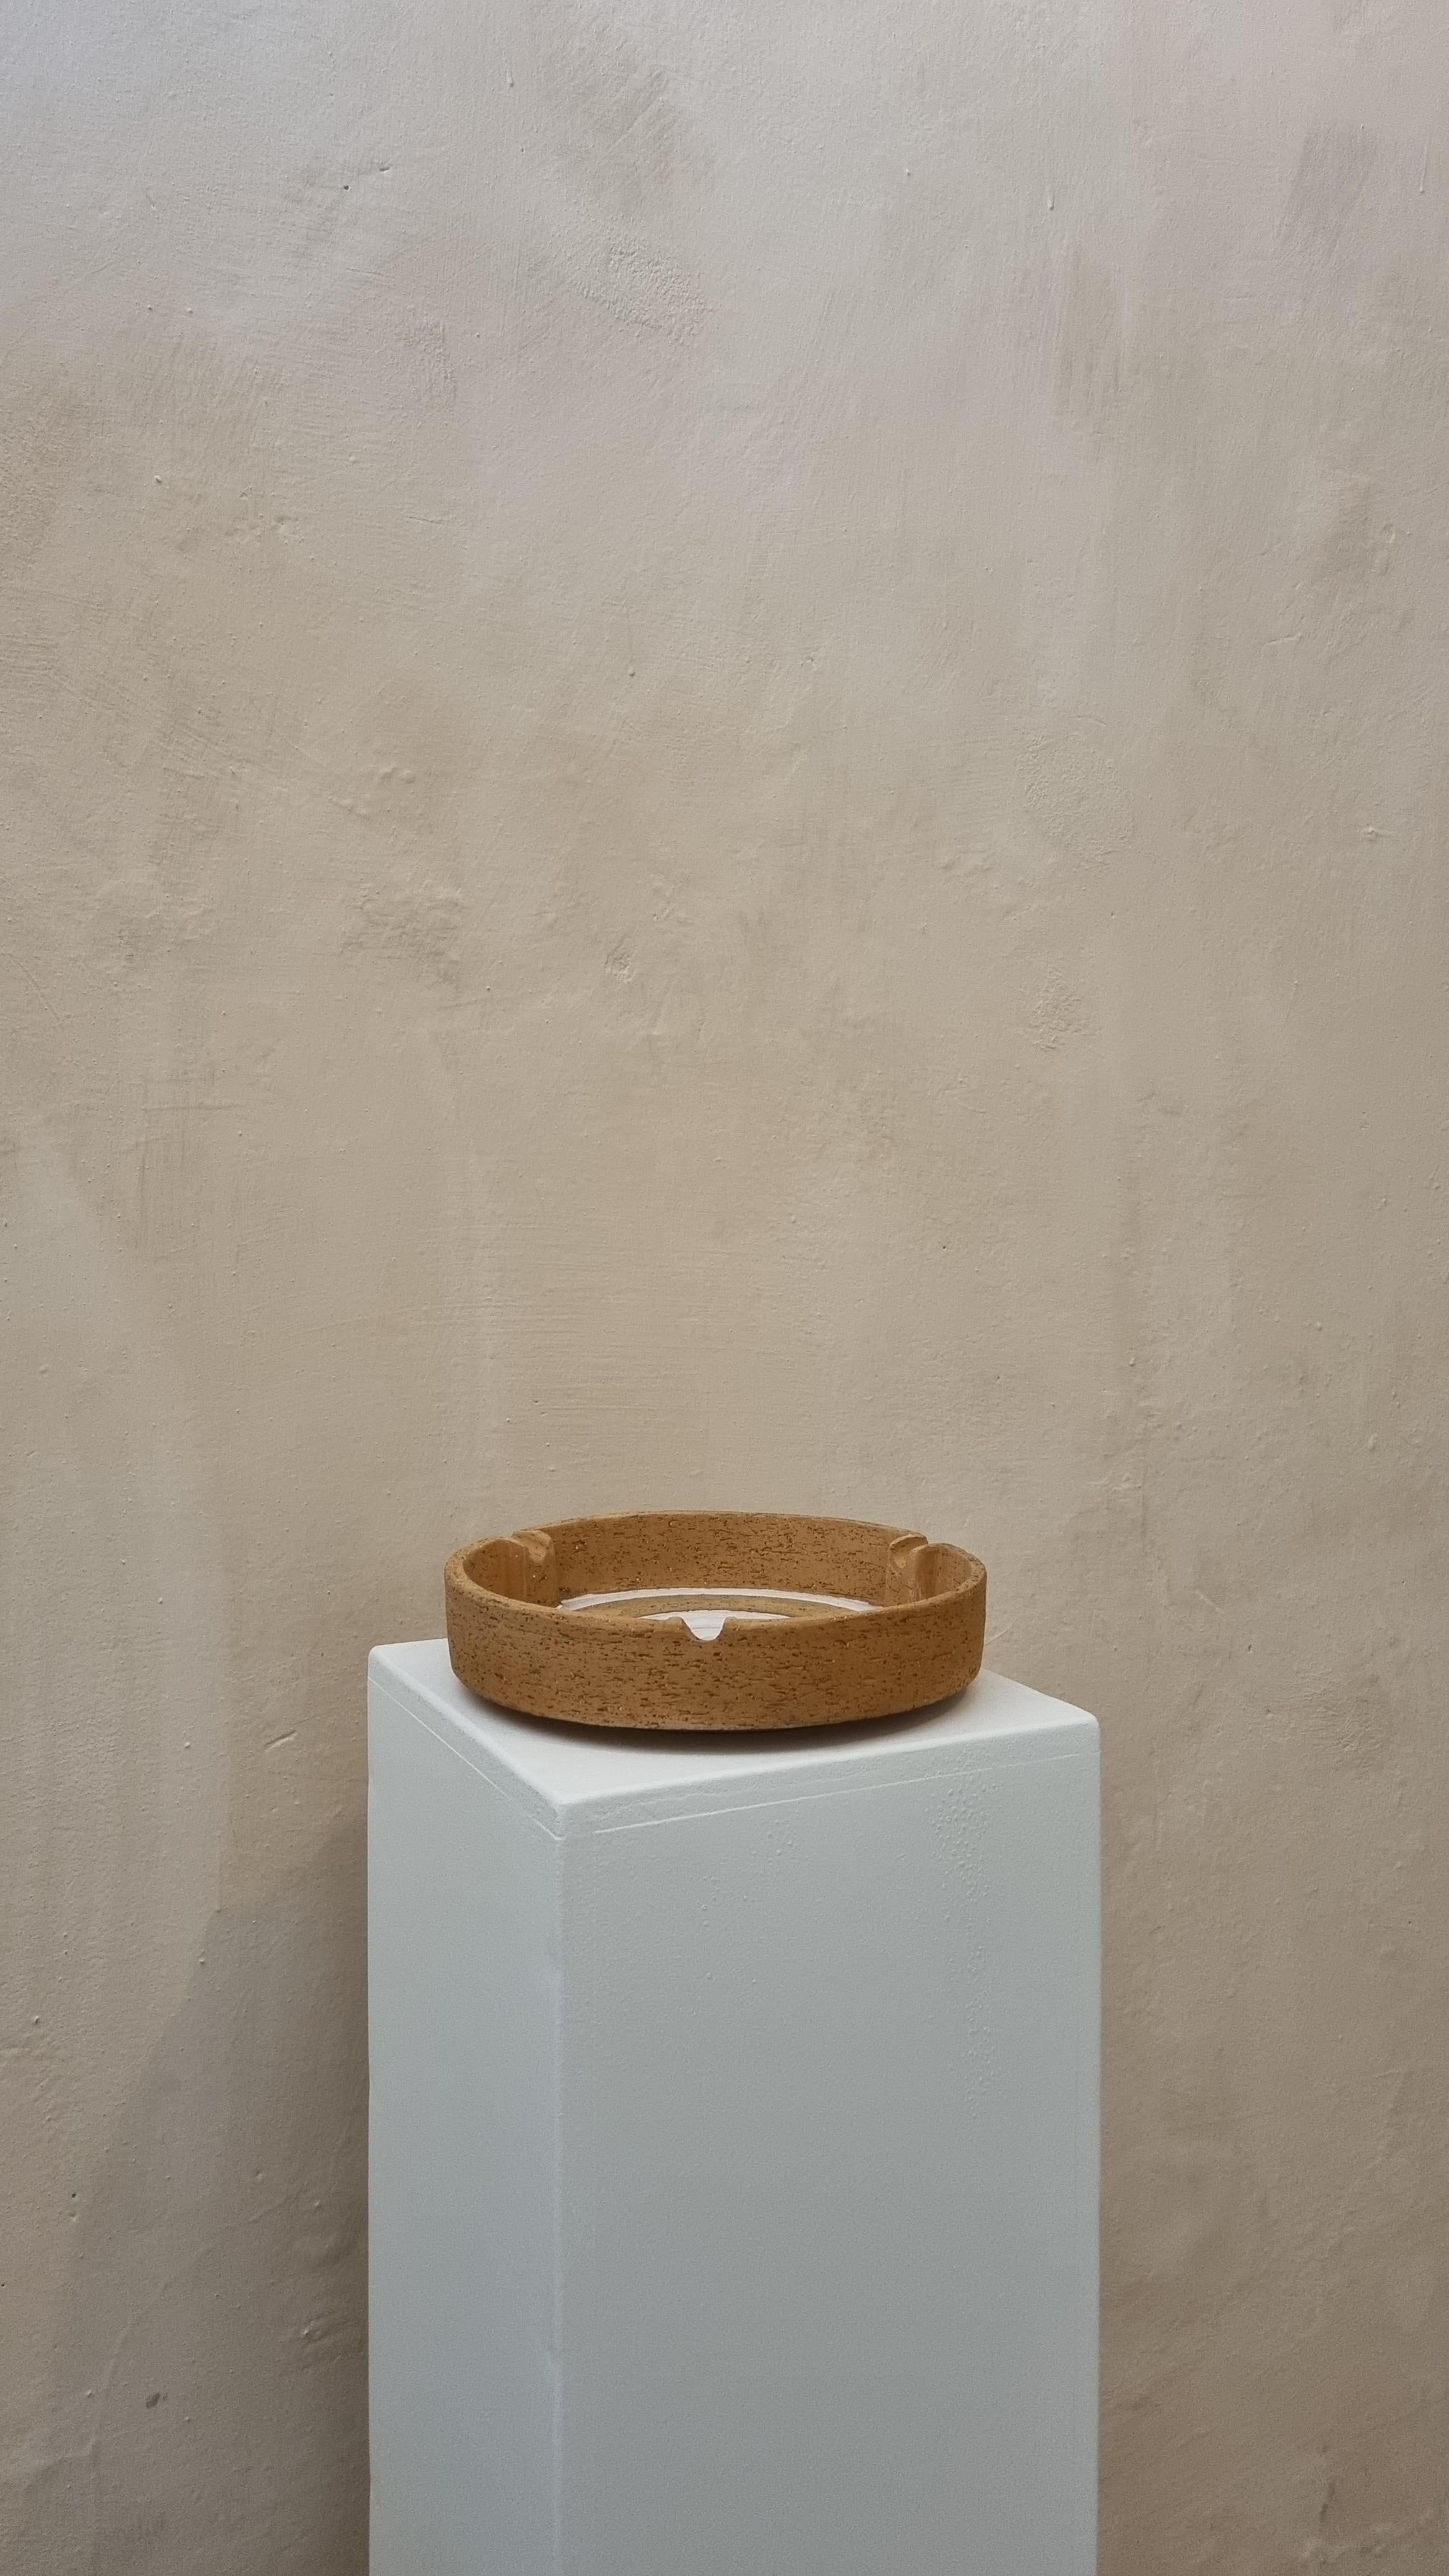 Ceramic ashtray Rosenthal Netter produced by Ceramiche Bitossi Montelupo, 70s.
Glazed ceramic, matte raw clay.
Each work created by Bitossi follows a very complex working process, both in the formal and decorative part.
The realization of a ceramic